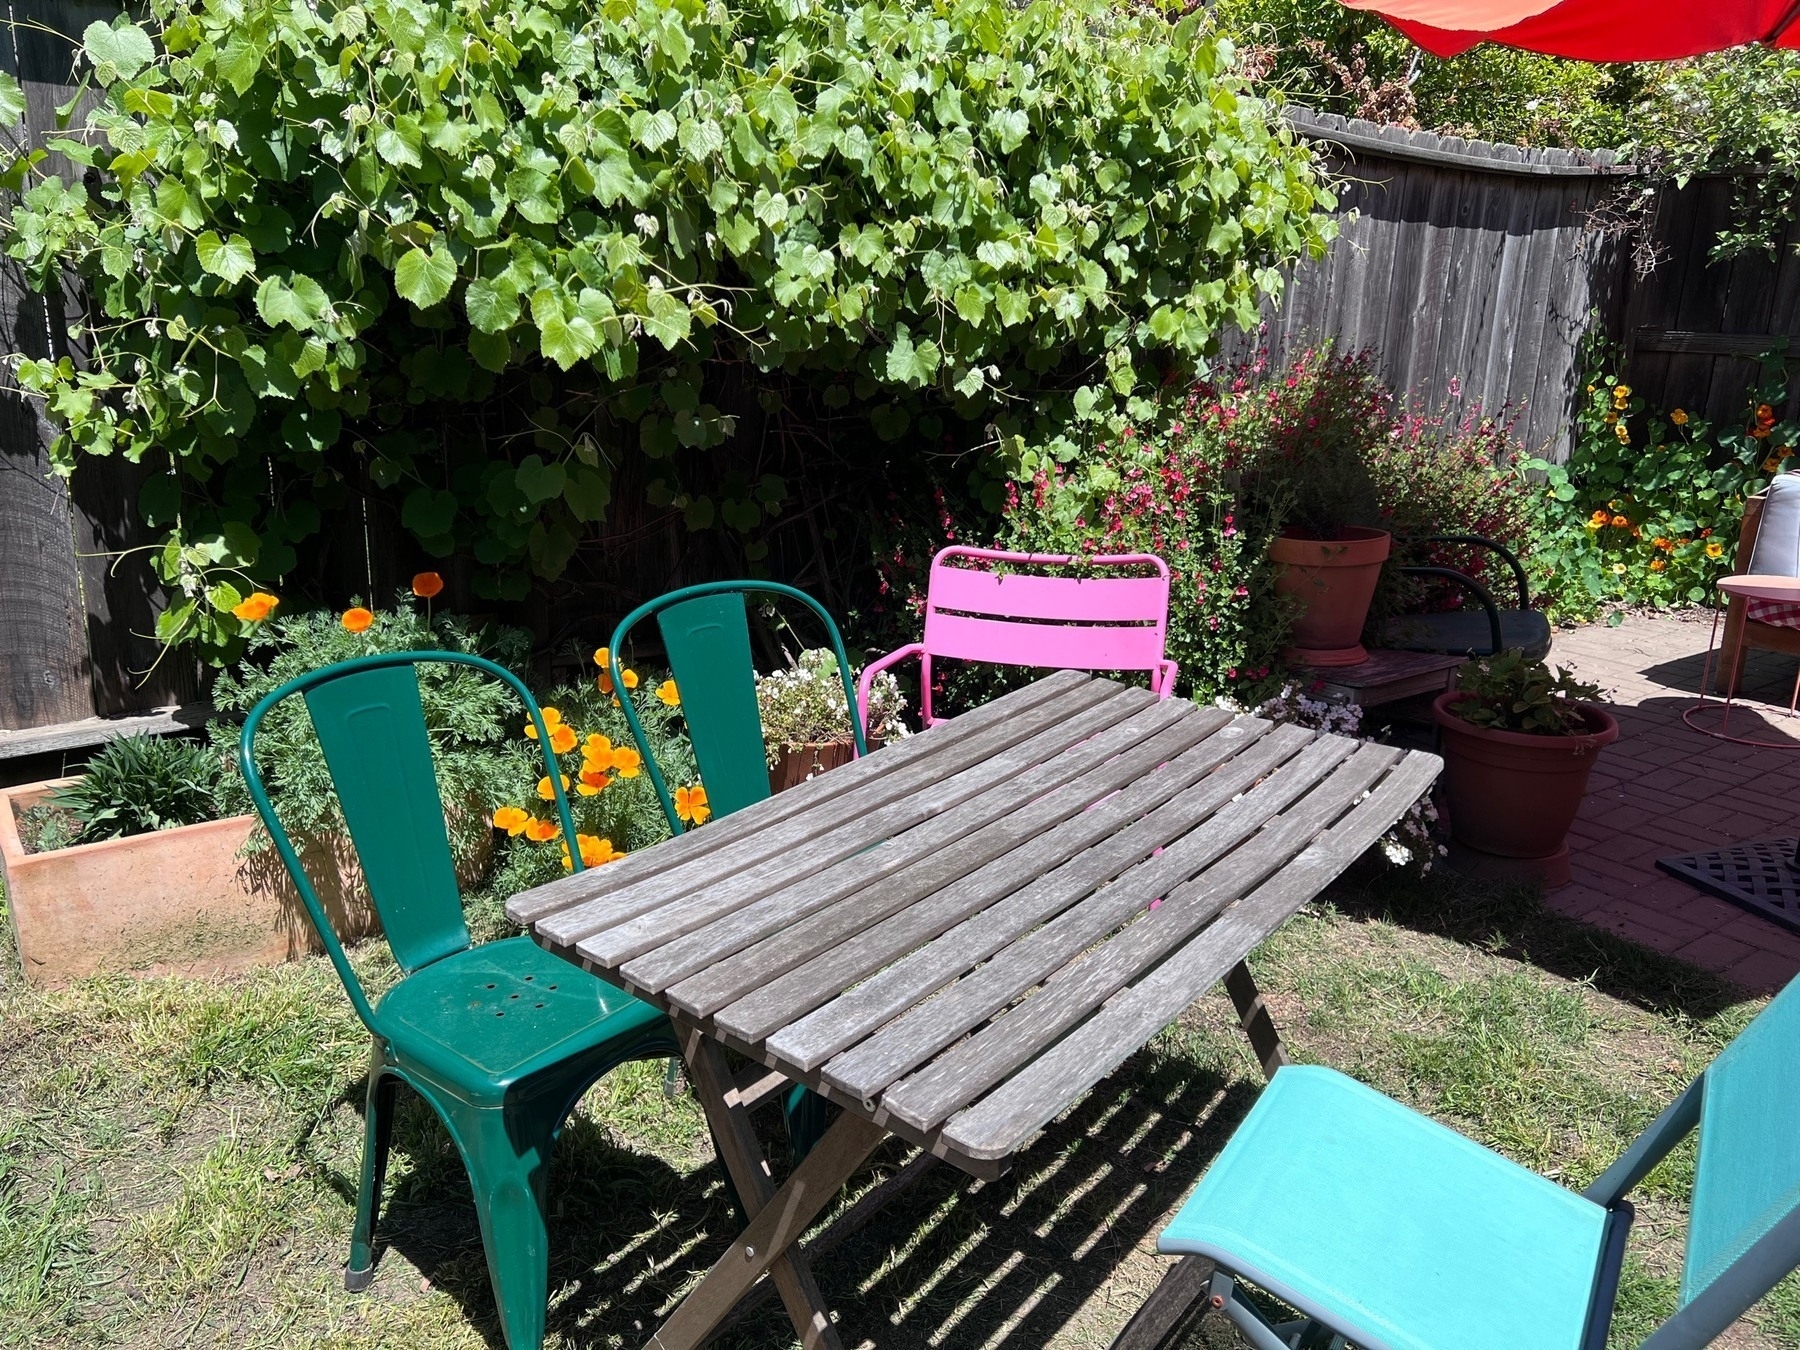 Two green chairs and a teal chair around an old wooden table, pink chair in the background. Poppies, small white flowers, and an exuberant grape behind them. 